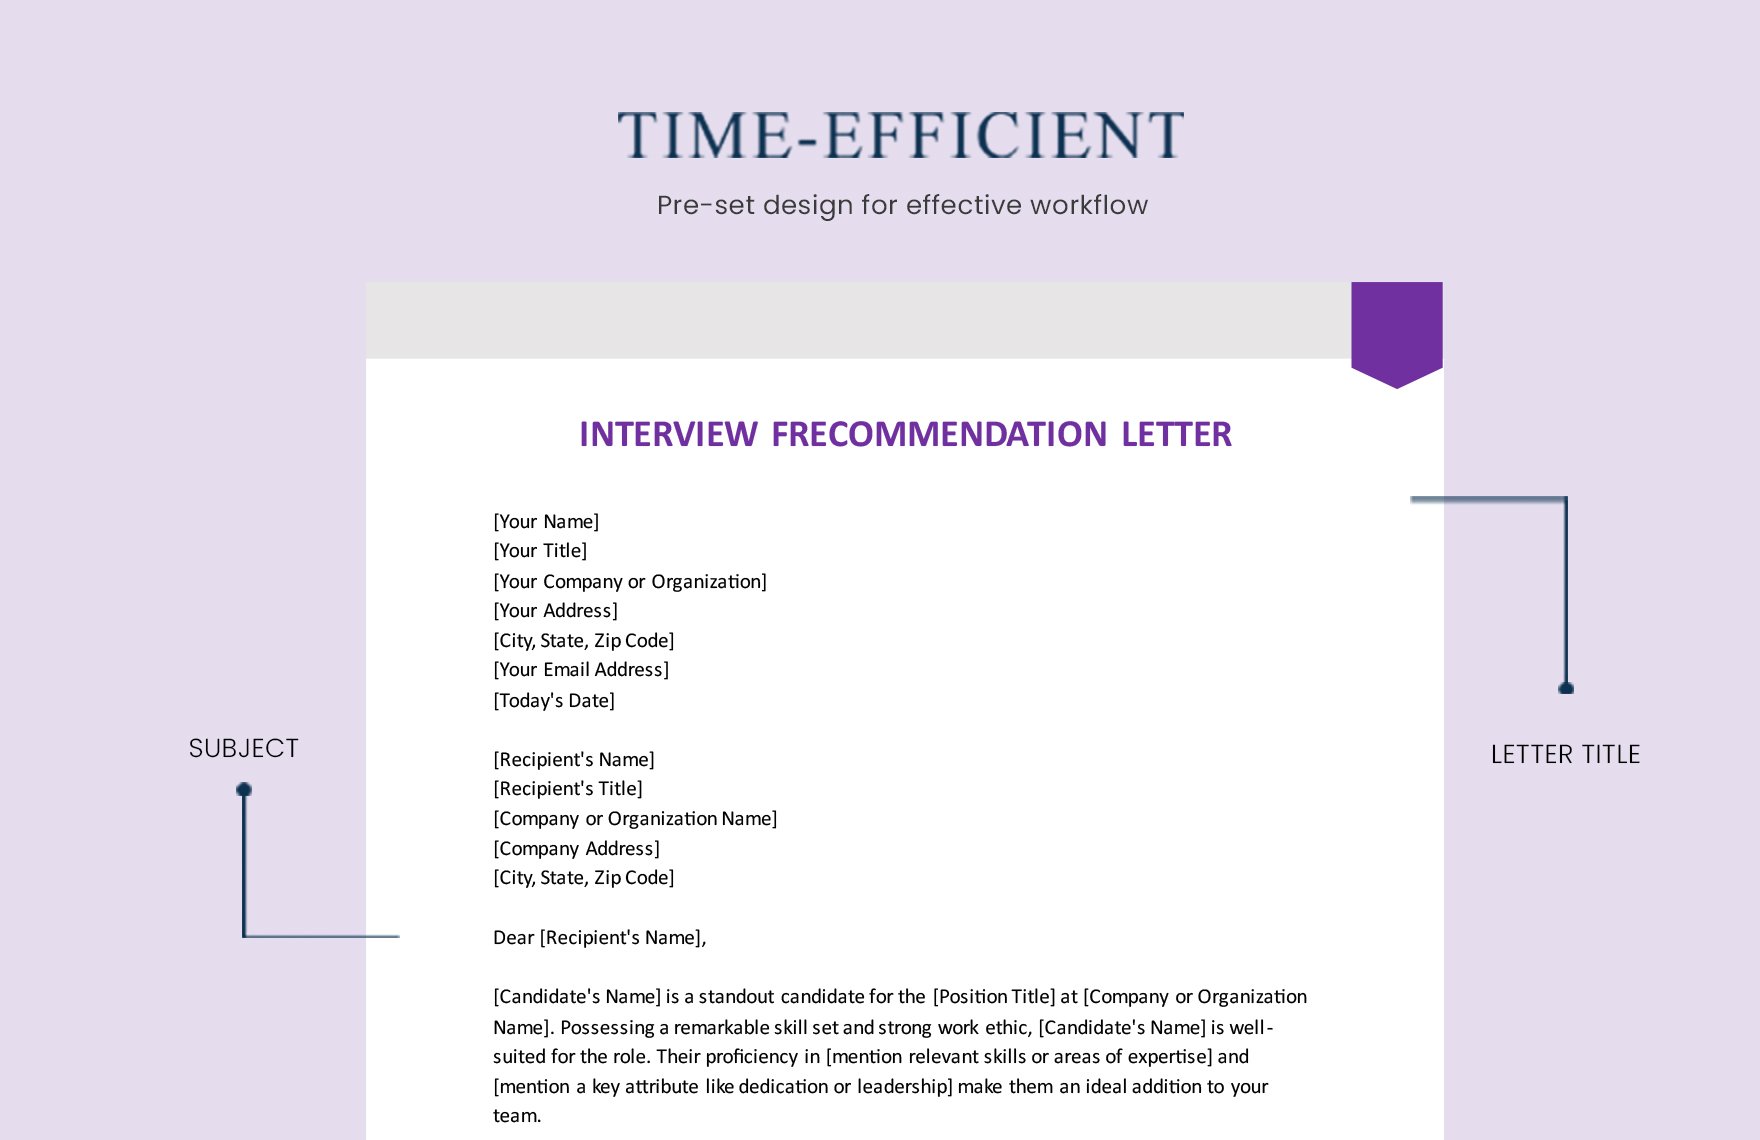 Interview Recommendation Letter